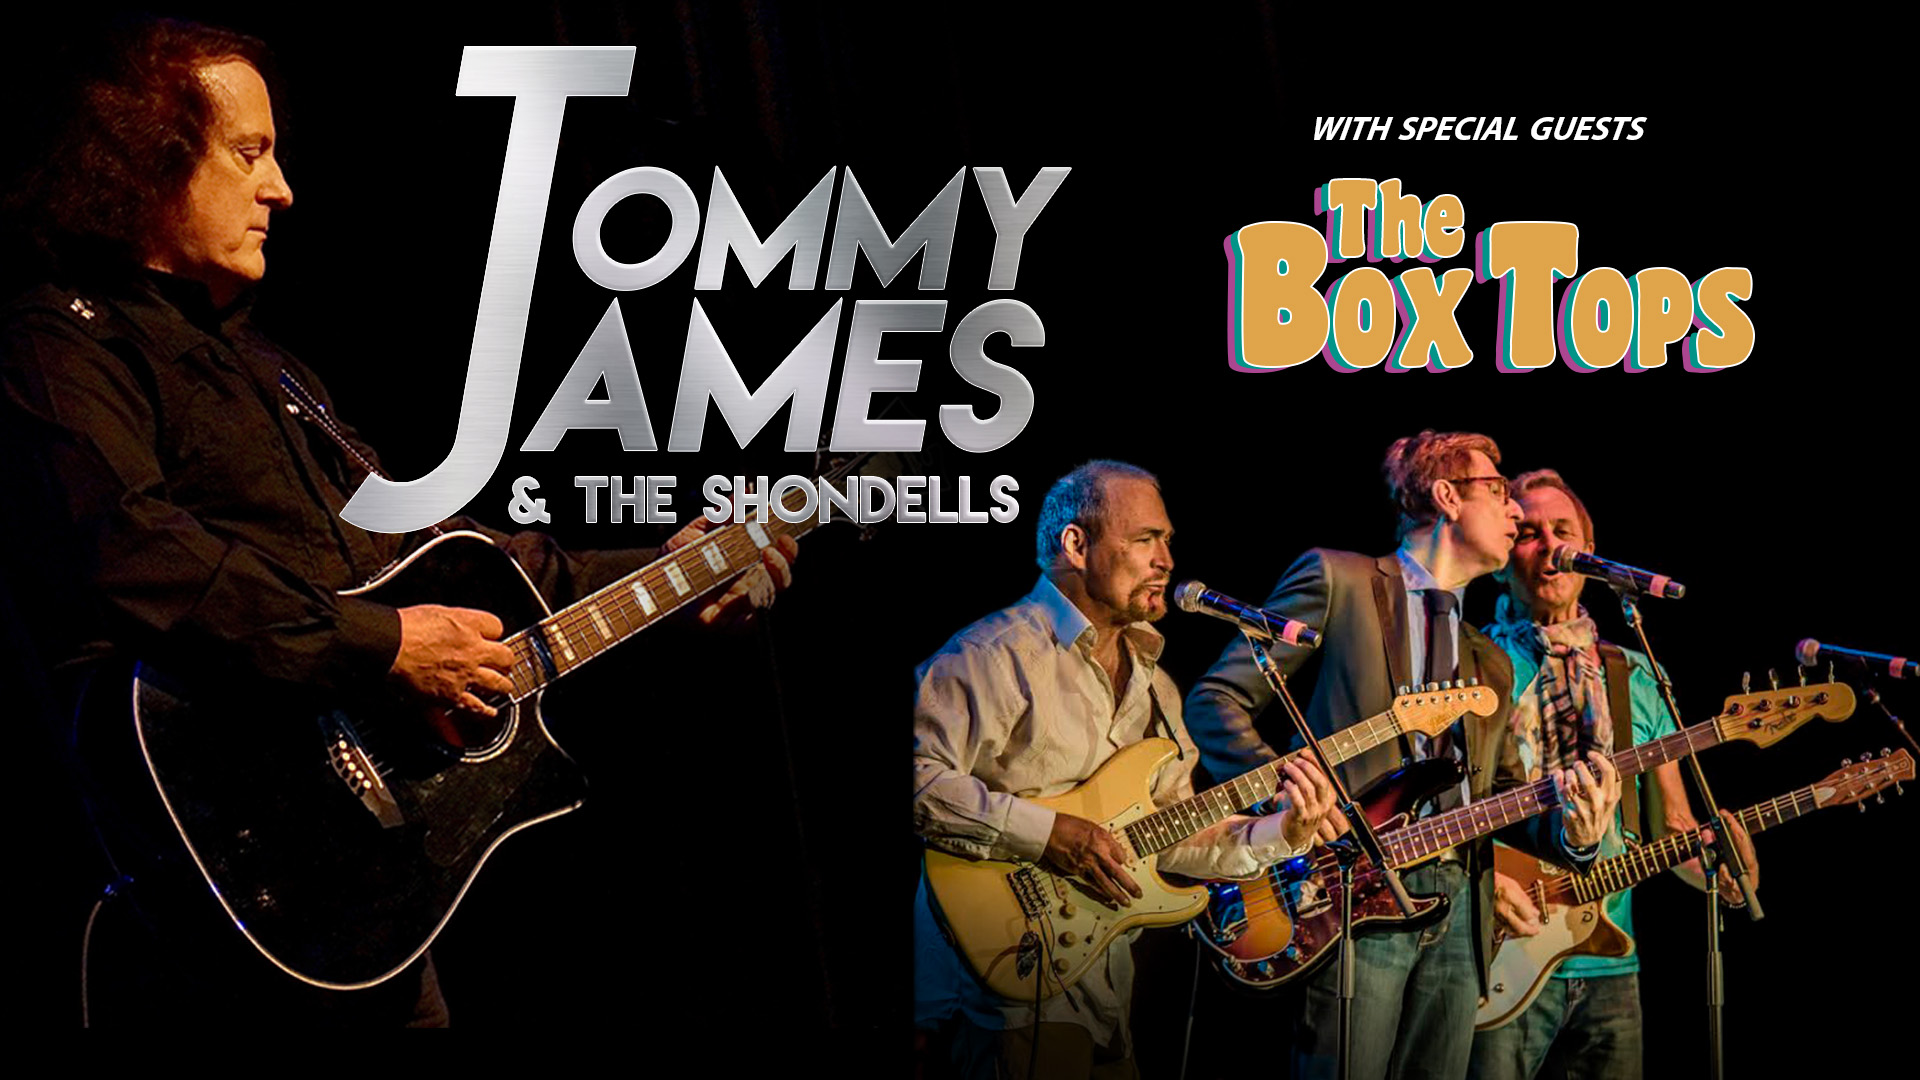 Tommy James & The Shondells with The Boxtops